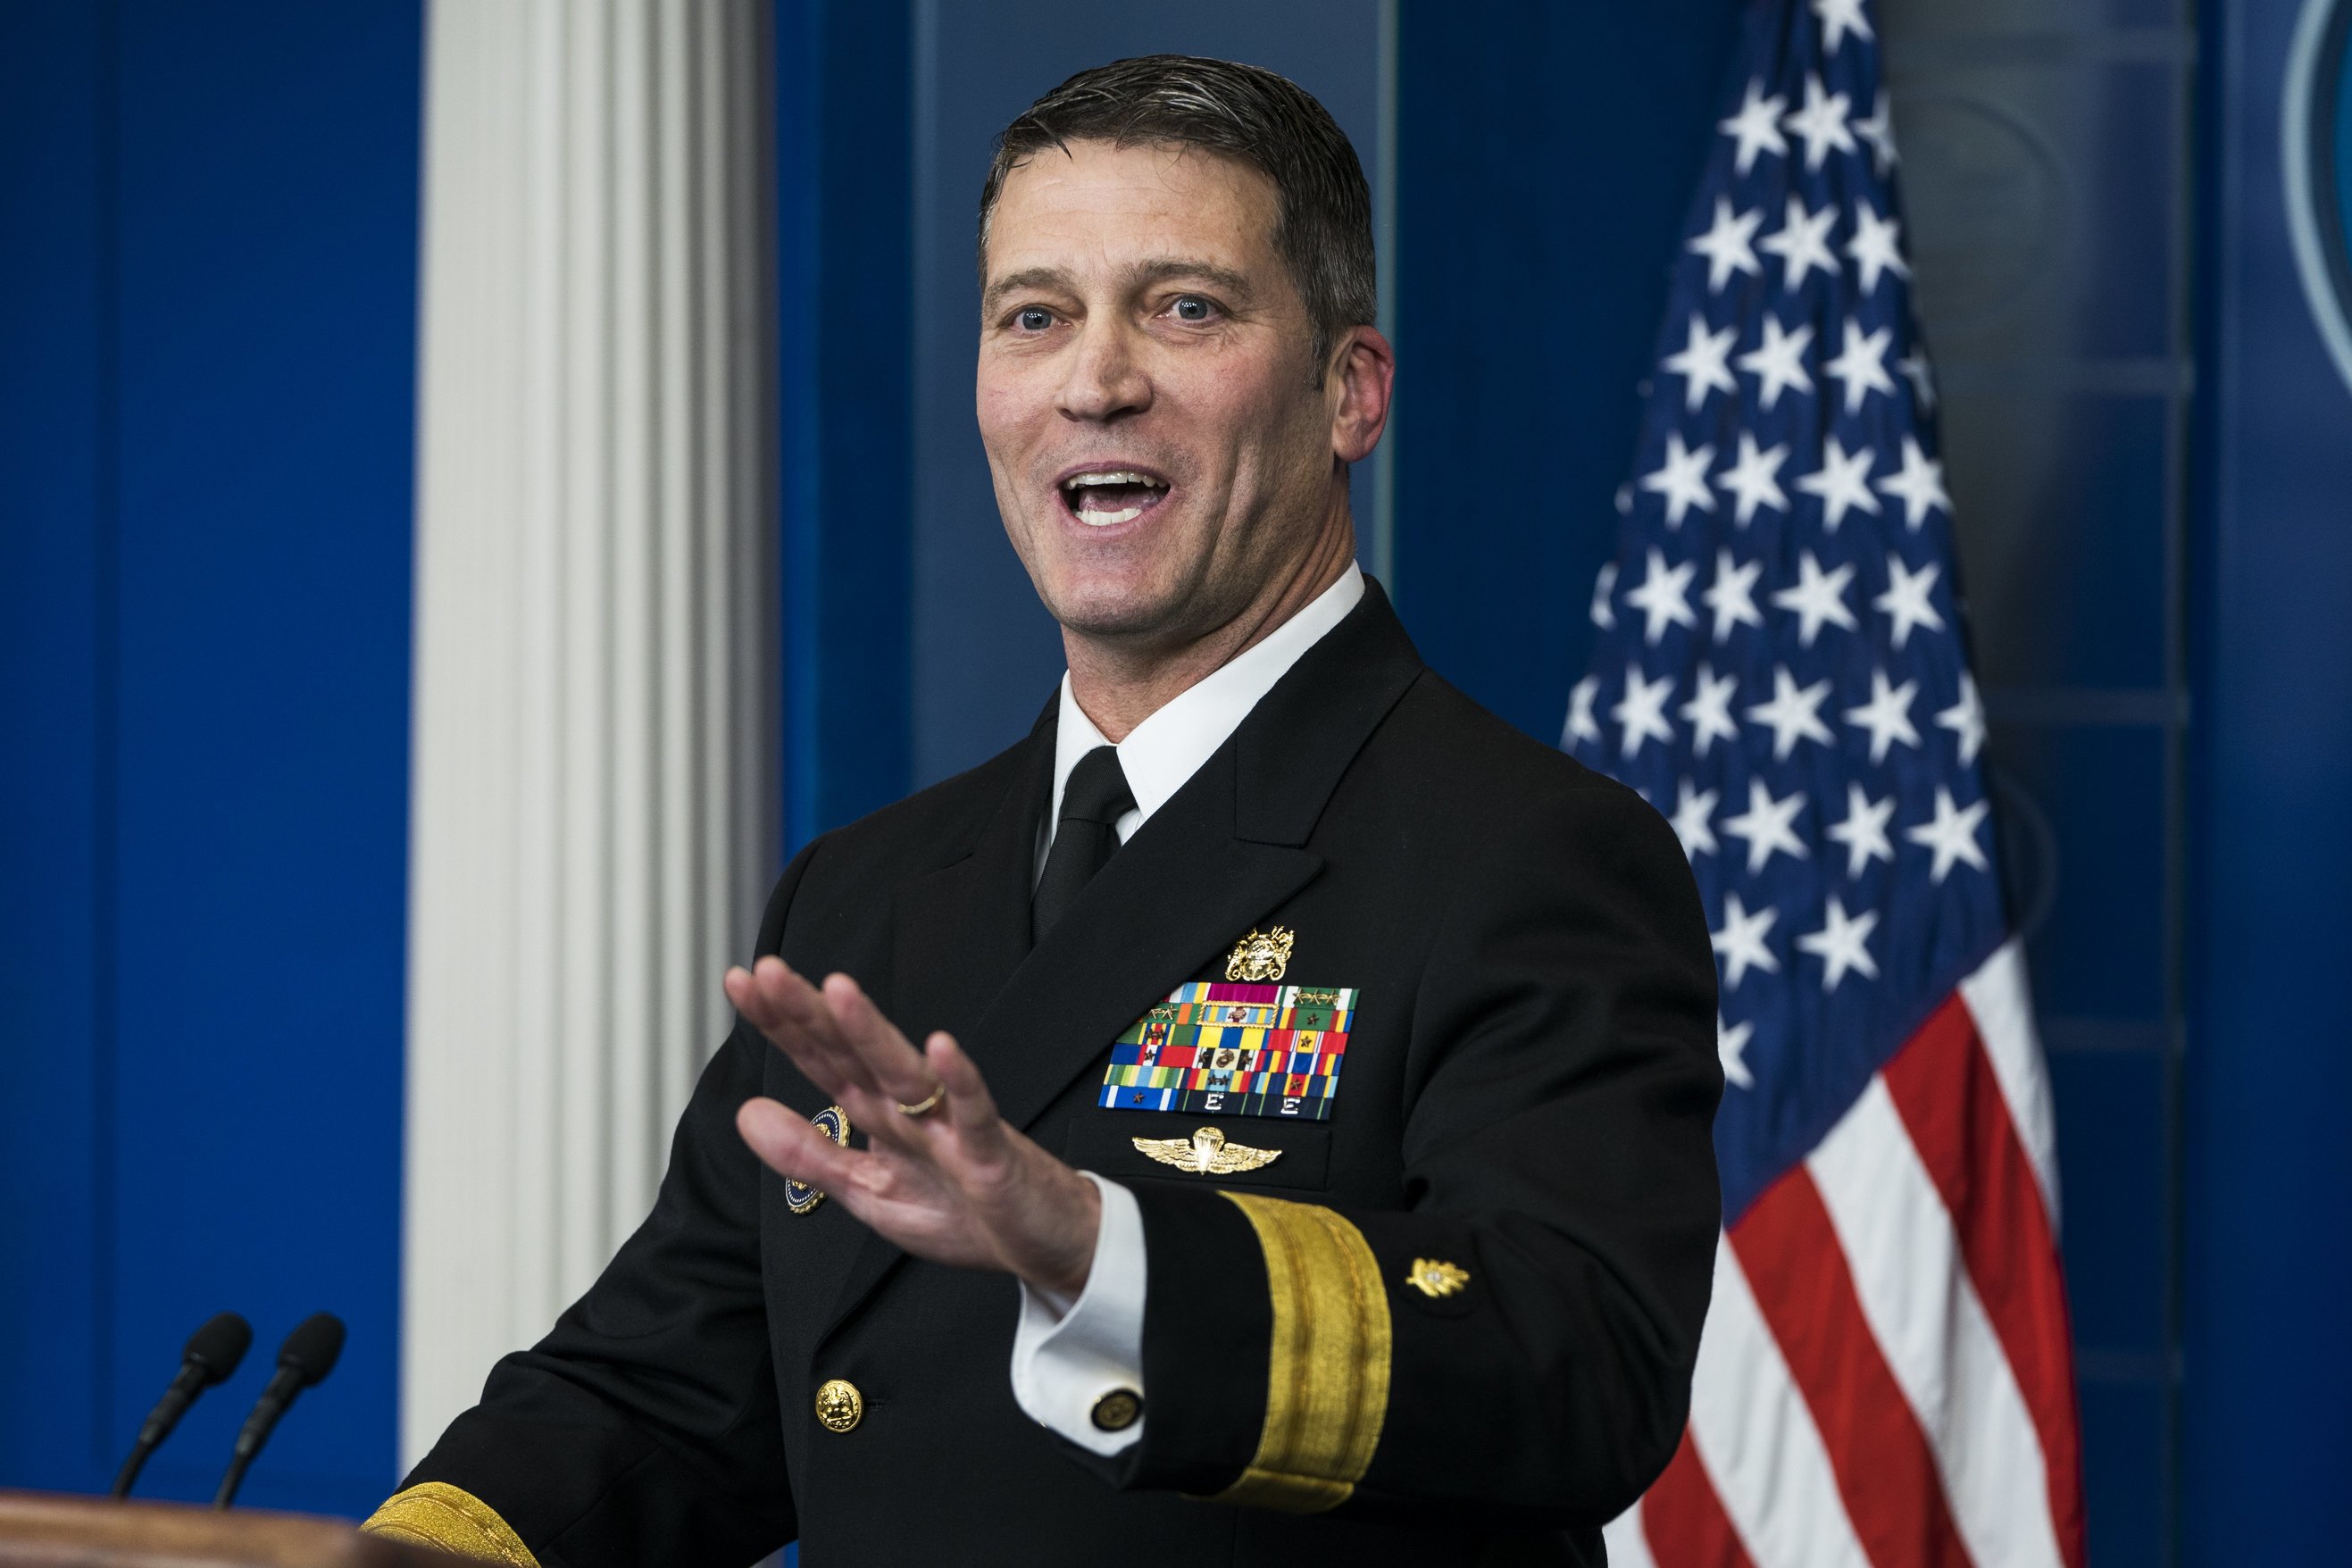 epa06635077 (FILE) Dr. Ronny Jackson, the White House physician, speaks about the physical exam conducted on US President Donald J. Trump Walter Reed National Military Medical Center last week in the White House Briefing Room in Washington, DC, USA 16 January 2018 (reissued 28 March 2018). According to a statement by US President Donald J. Trump on 28 March 2018, US Secretary of Veterans Affairs David Shulkin will resign and Trump intends to nomimate White House physician Dr. Ronny Jack to replace him.  EPA/JIM LO SCALZO